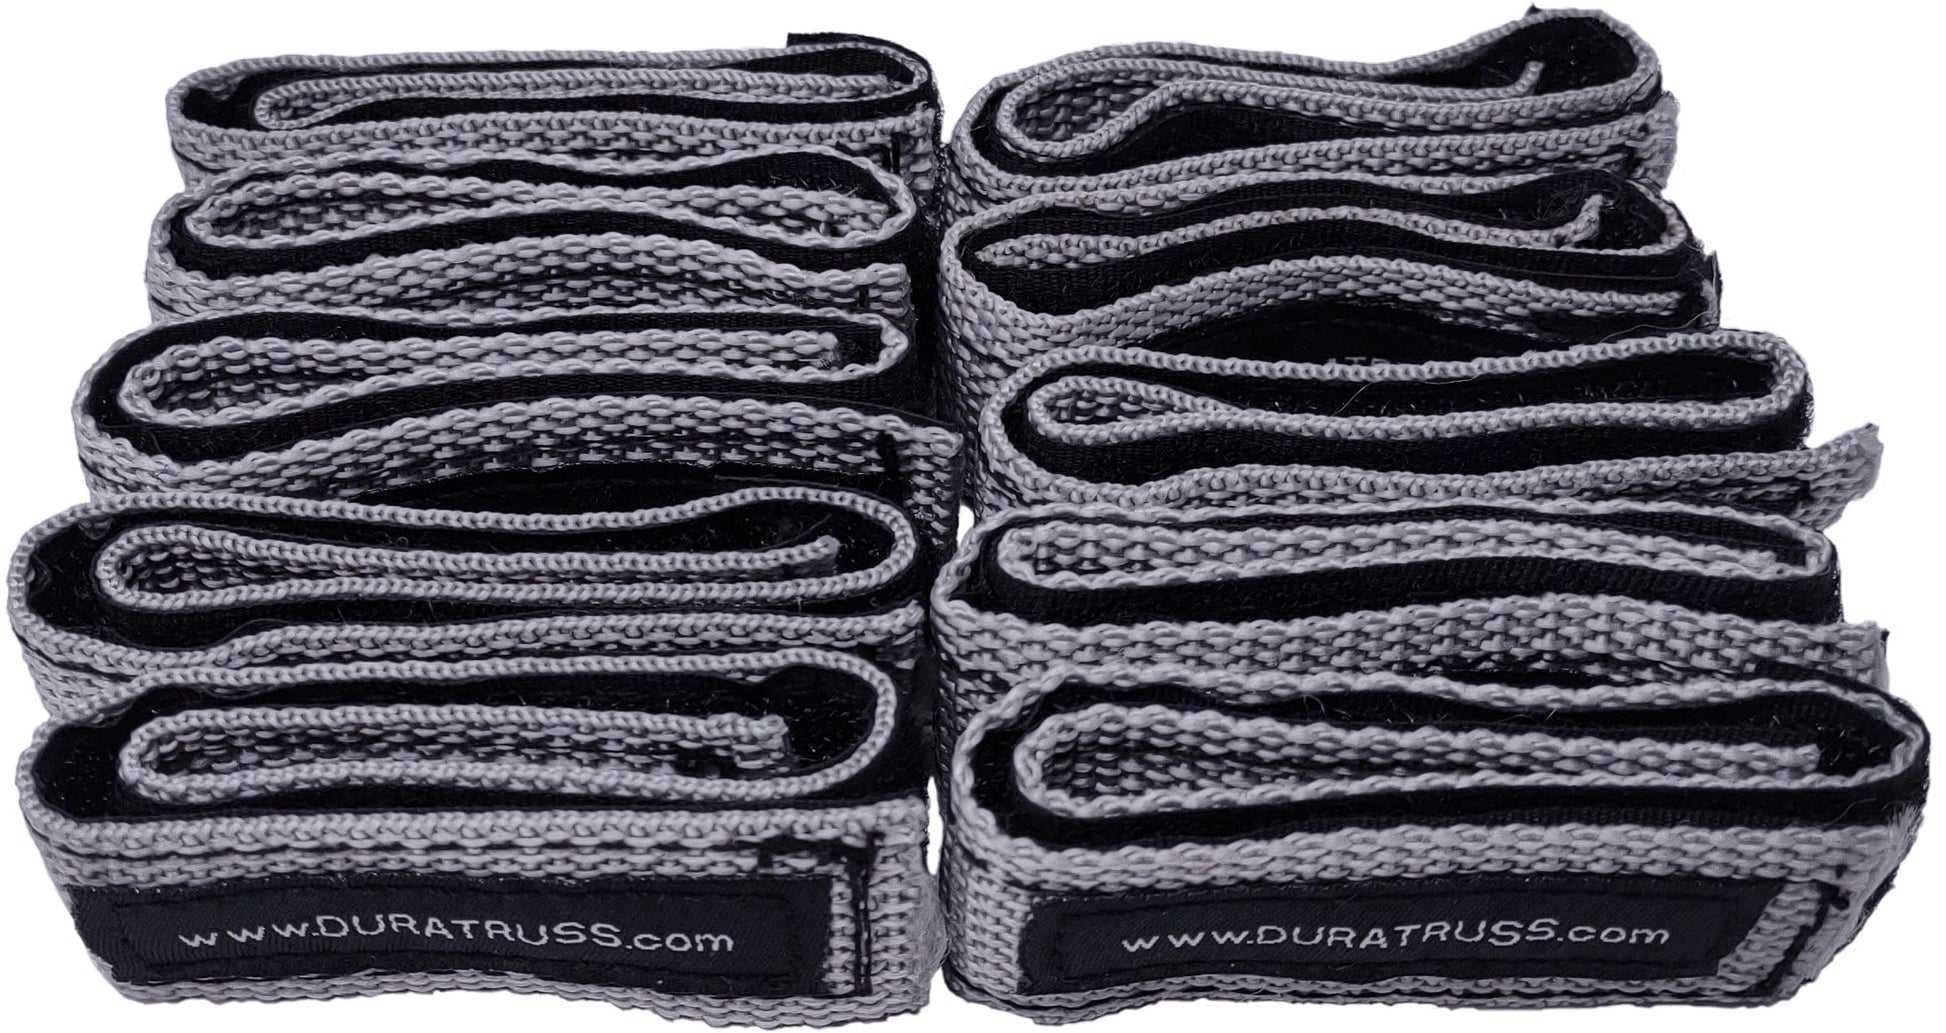 Global Truss Personal Rigging Pack Includes Gloves, Rigging Tool, Velcro  Cable Straps & Grip Pouch